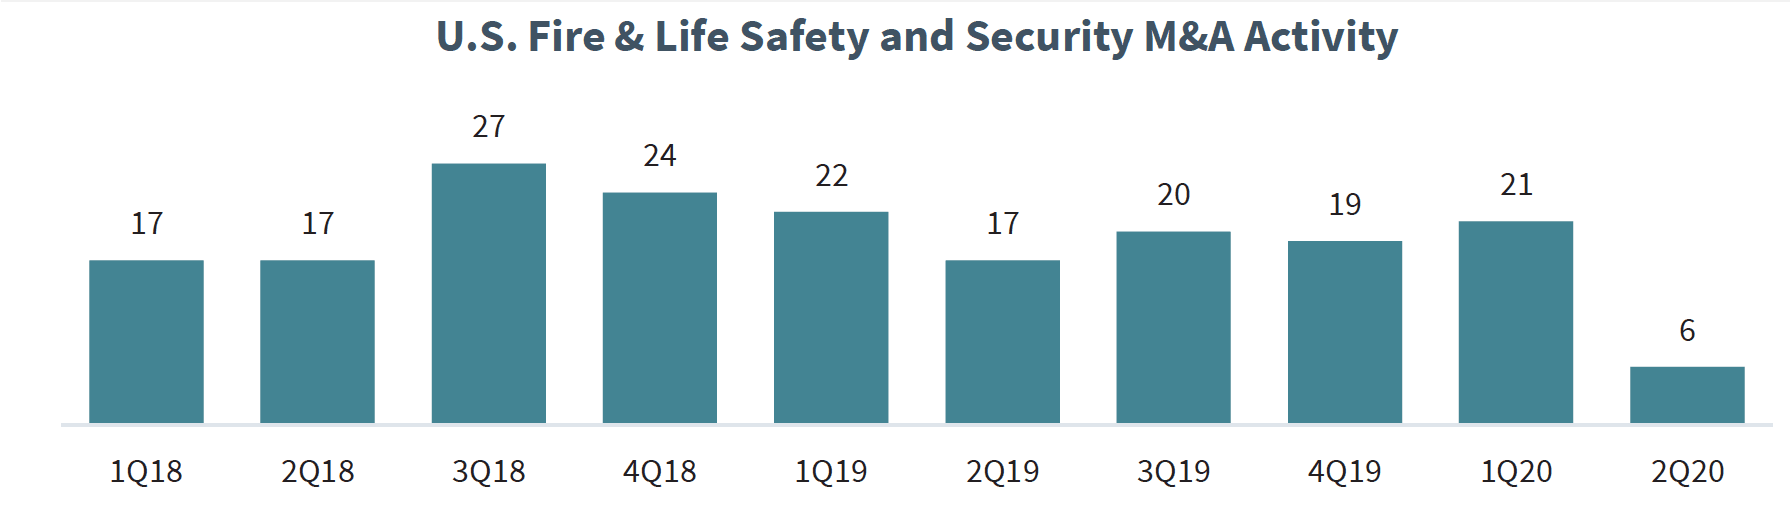 Chart of U.S. Fire & Life Safety and Security M&A Activity